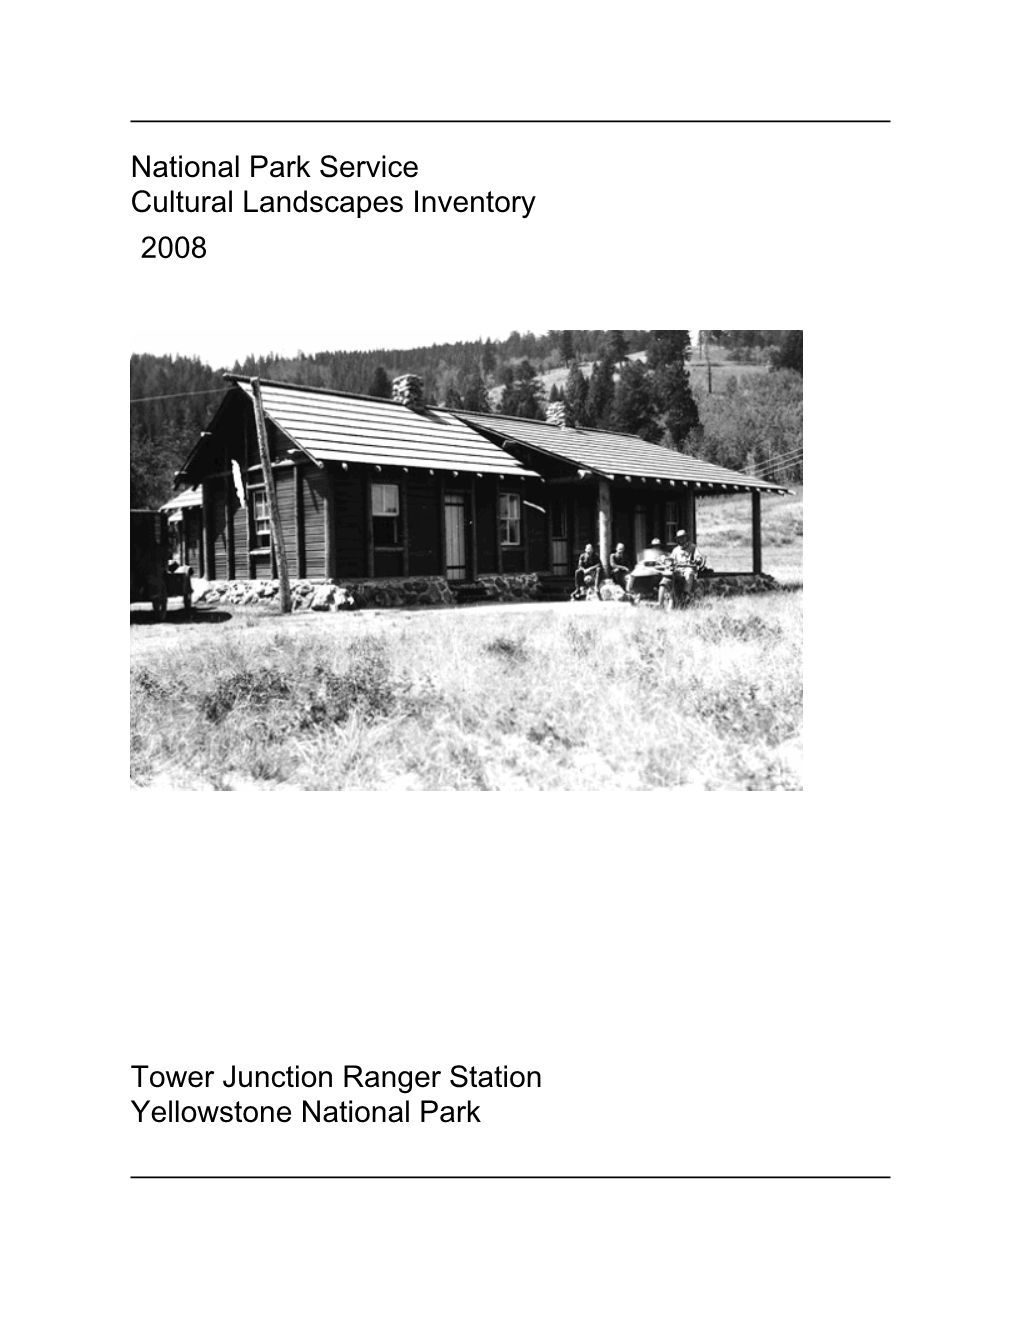 National Park Service Cultural Landscapes Inventory Tower Junction Ranger Station Yellowstone National Park 2008